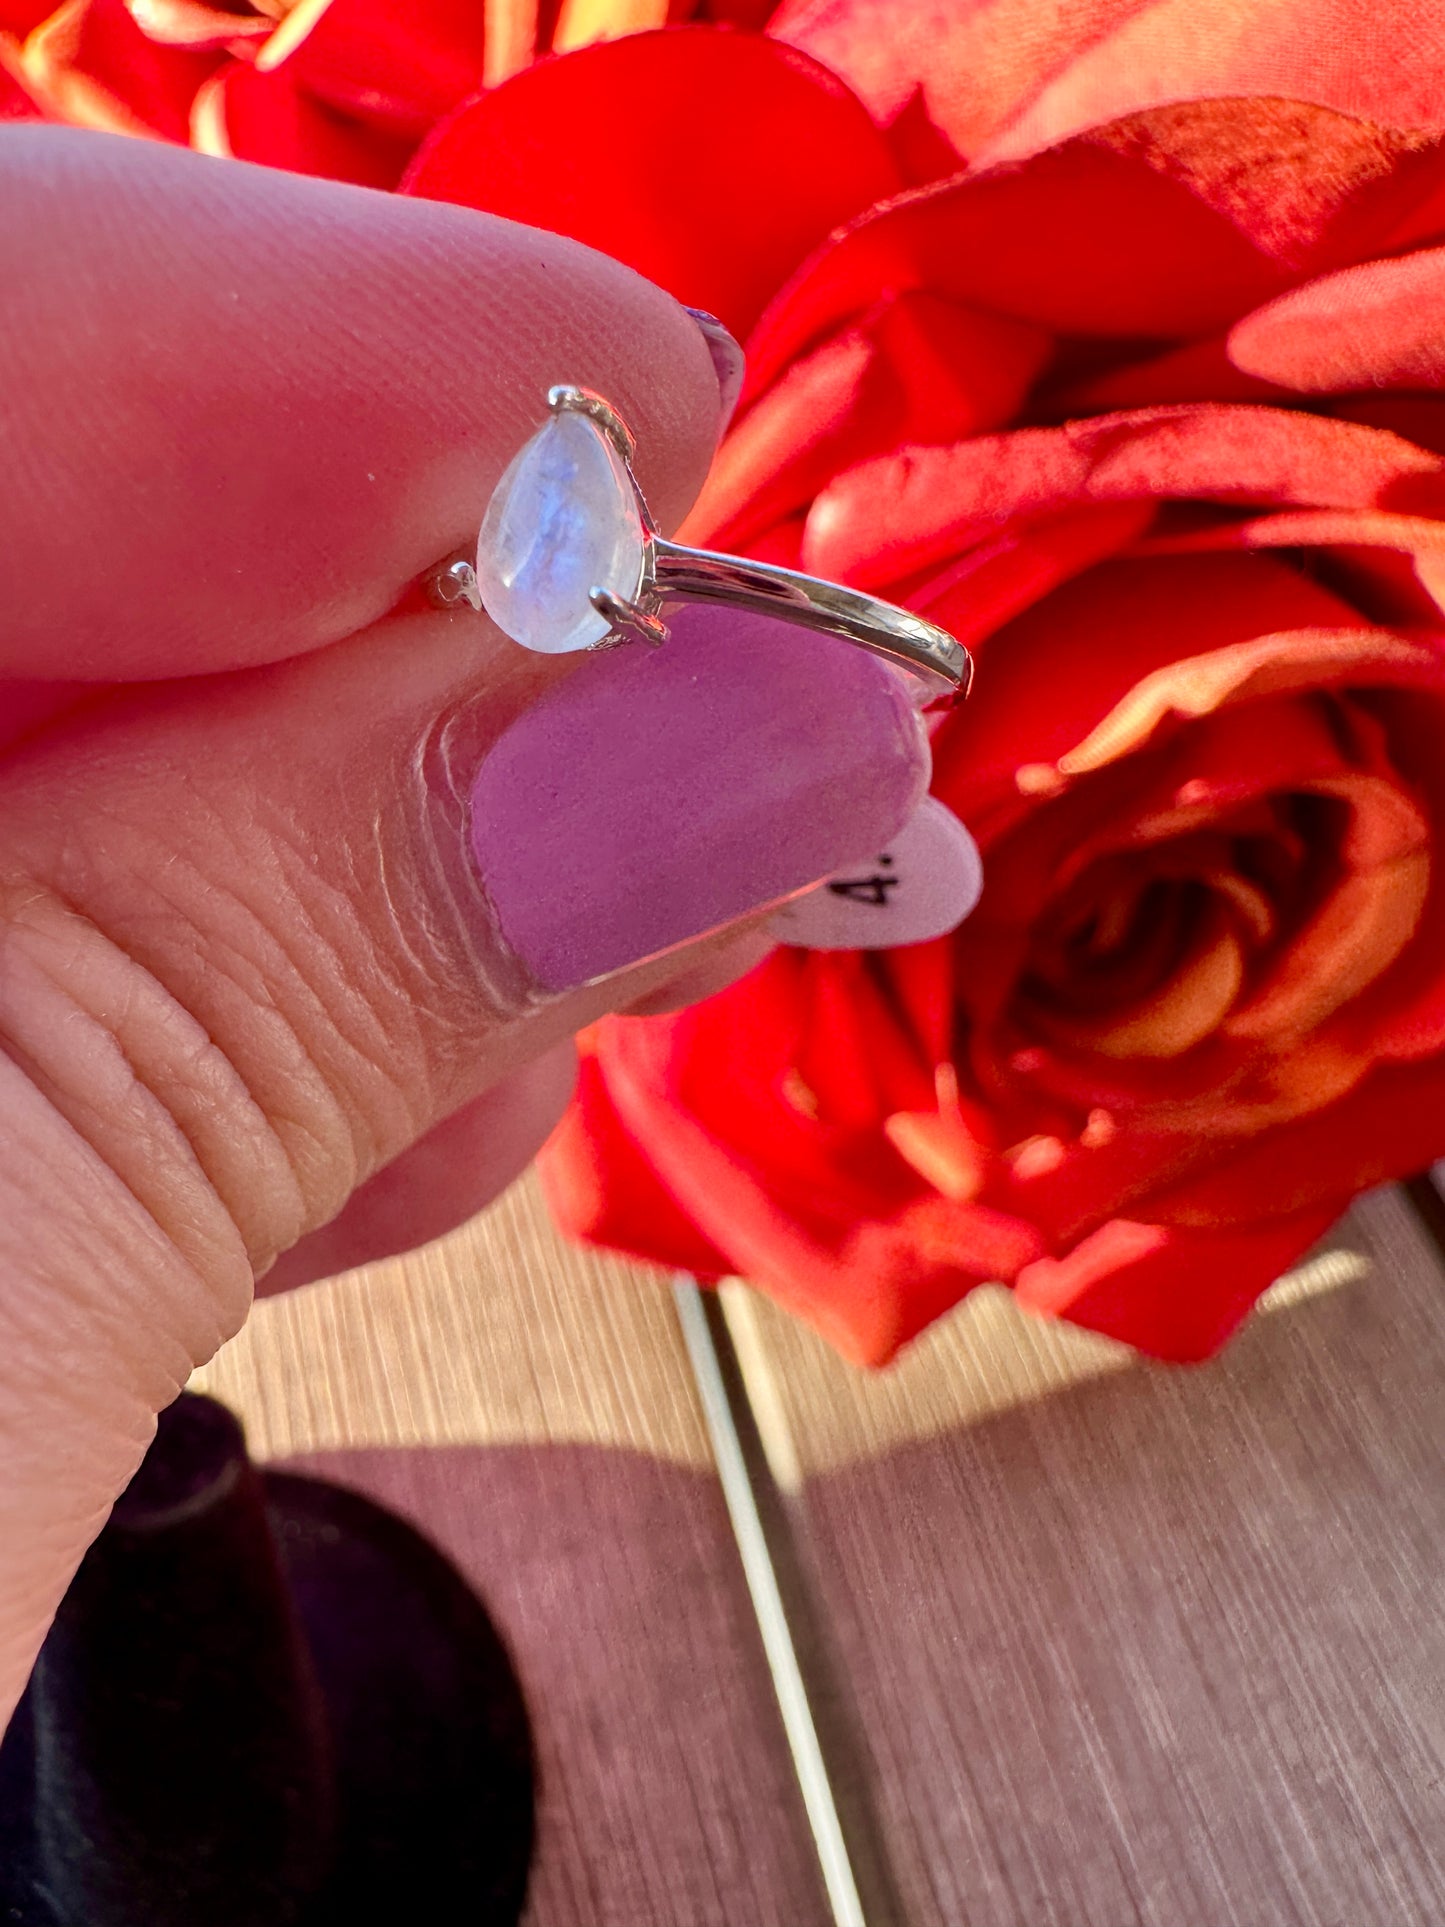 Sterling Silver Moonstone Ring Size 4.25, Captivating Handcrafted Gemstone Jewelry, Mystical Lunar Inspired Accessory, Unique Gift Idea